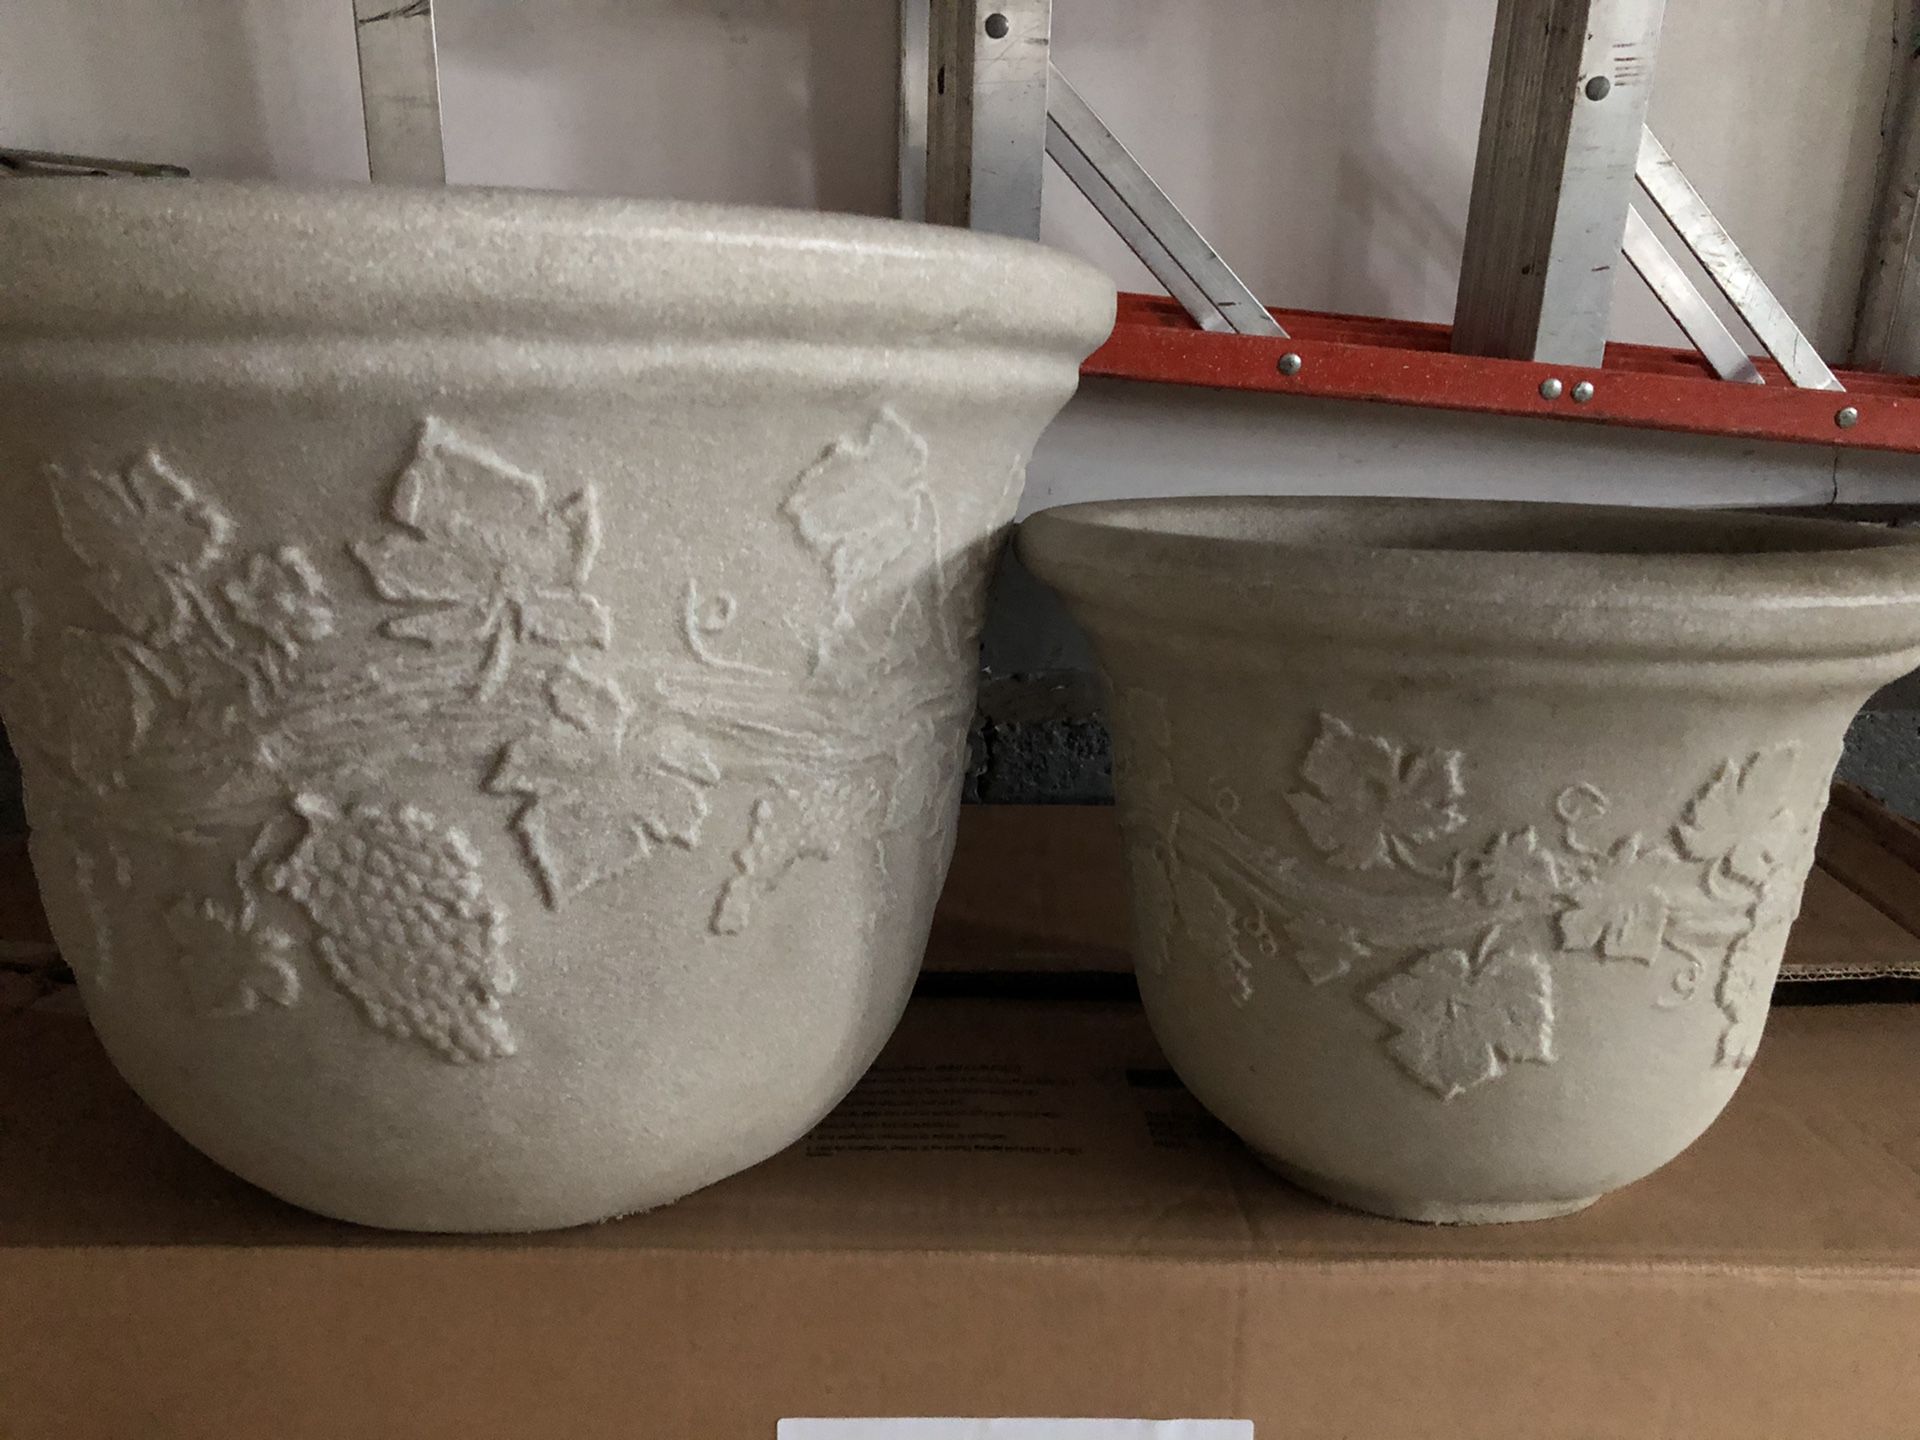 Outdoor flower pot -large and small